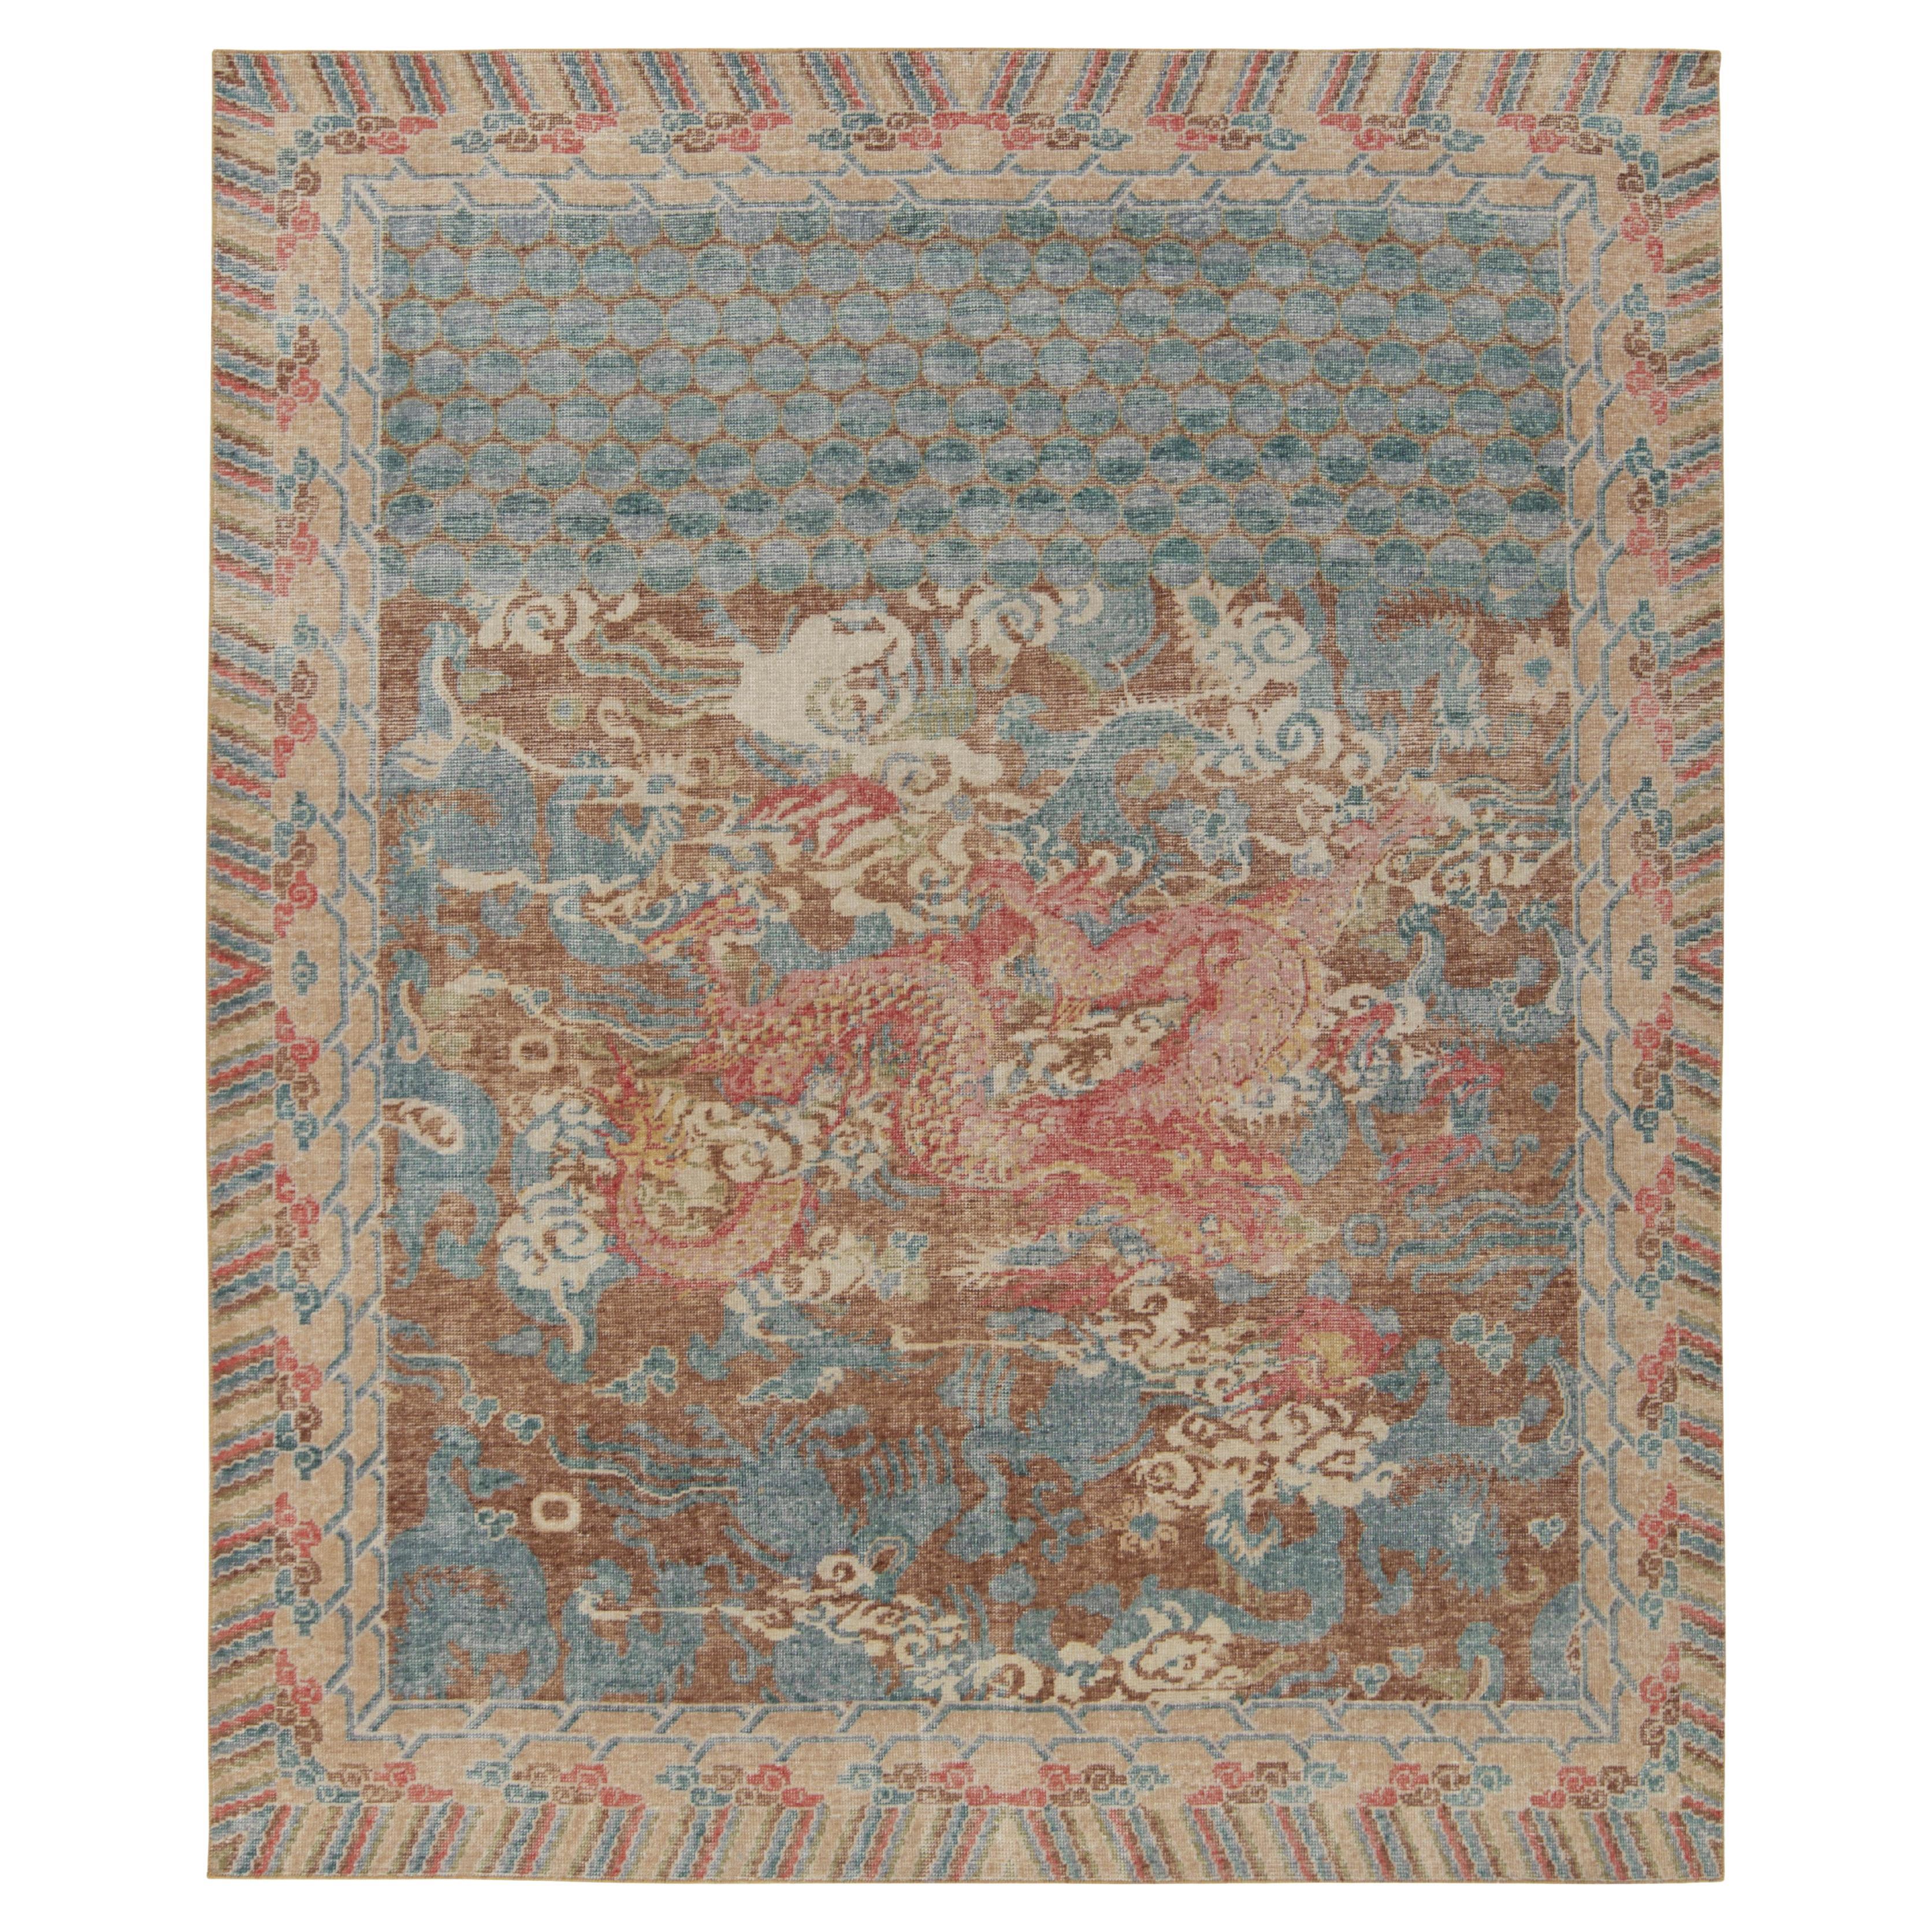 Rug & Kilim's Distressed Style Dragon Rug in Brown, Blue, Red Pictorials For Sale